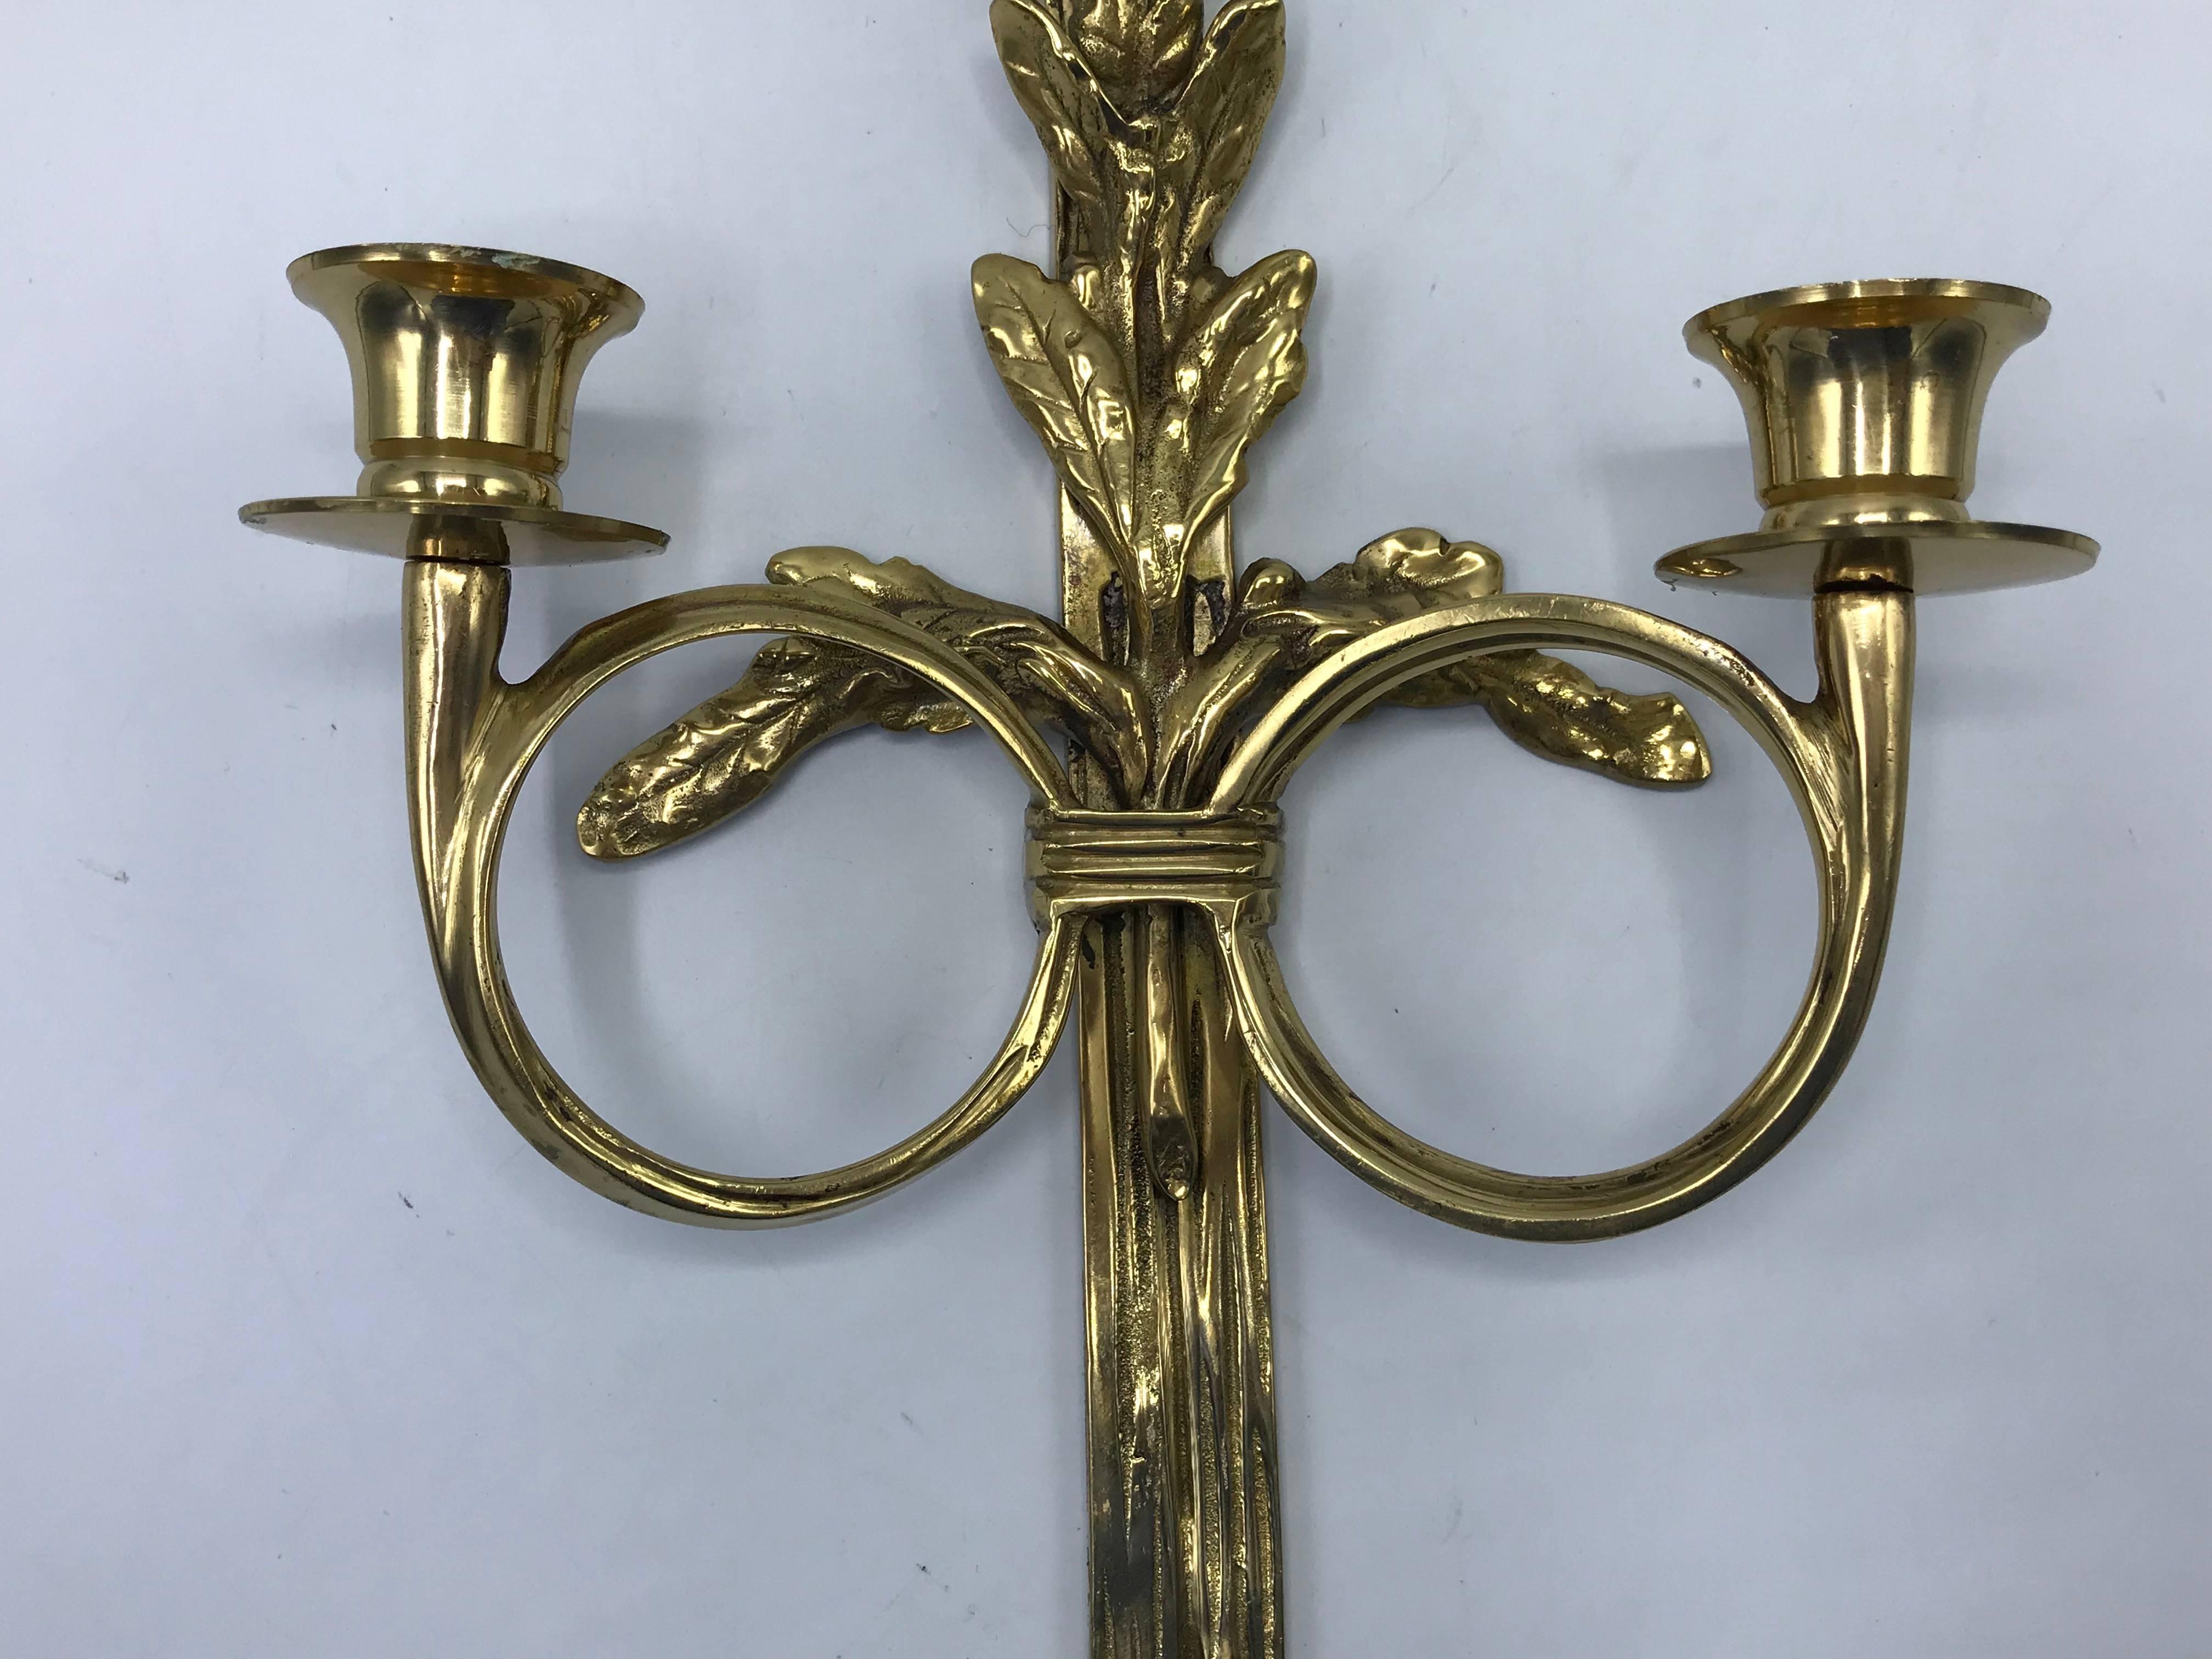 20th Century 1960s Italian Brass Candlestick Sconce with Tassel and Laurel Wreath Motif, Pair